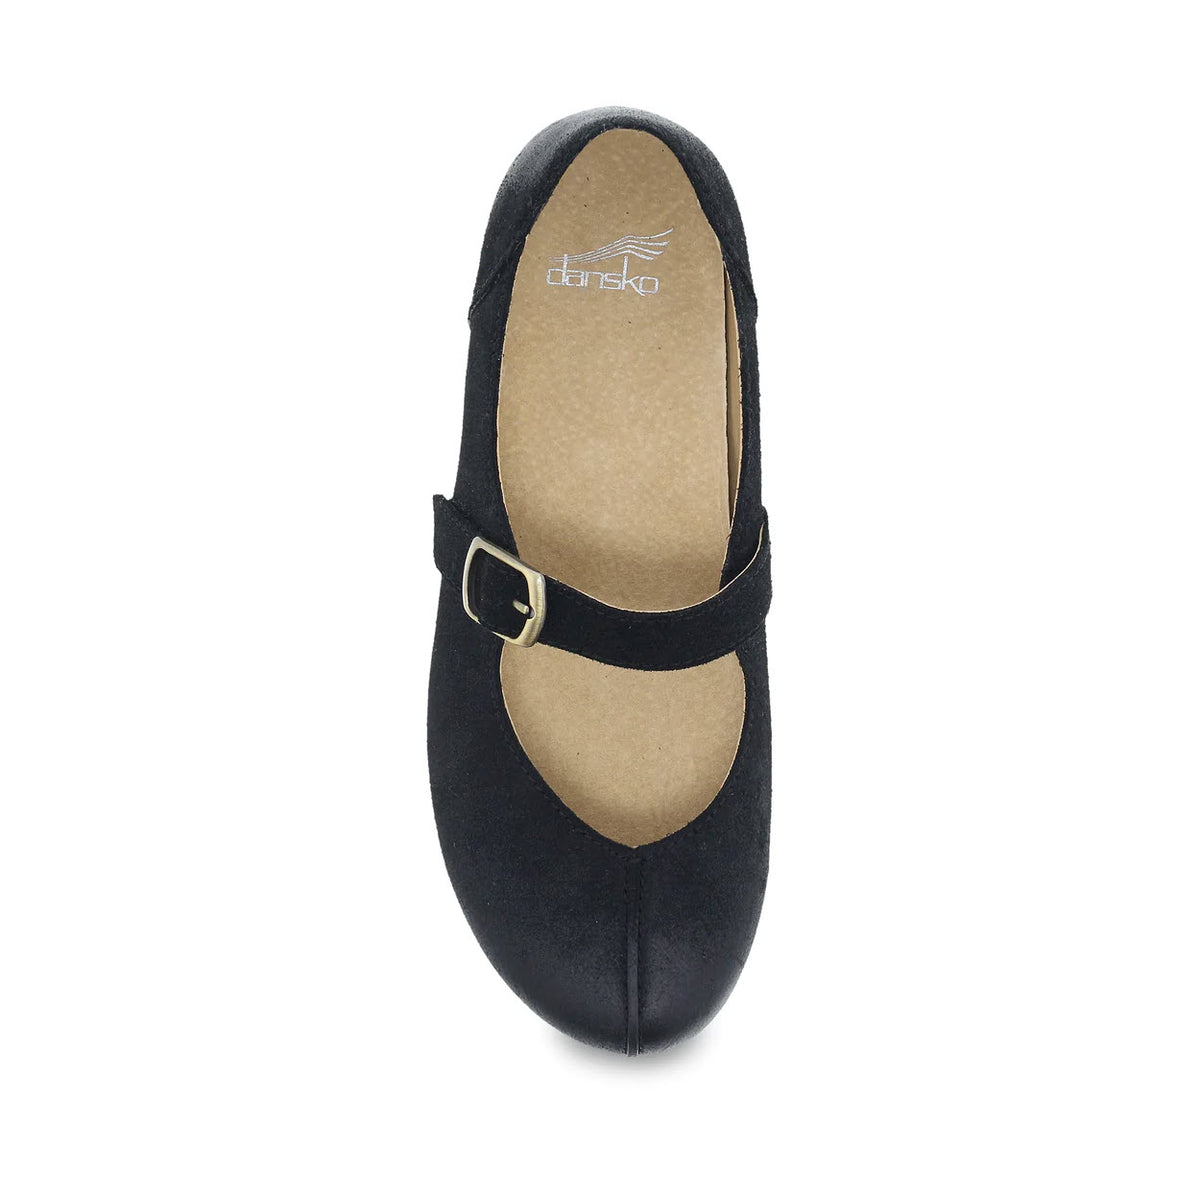 Black Dansko Mika Mary Jane shoe with a single strap and buckle, crafted from high-quality leathers, viewed from above on a white background.